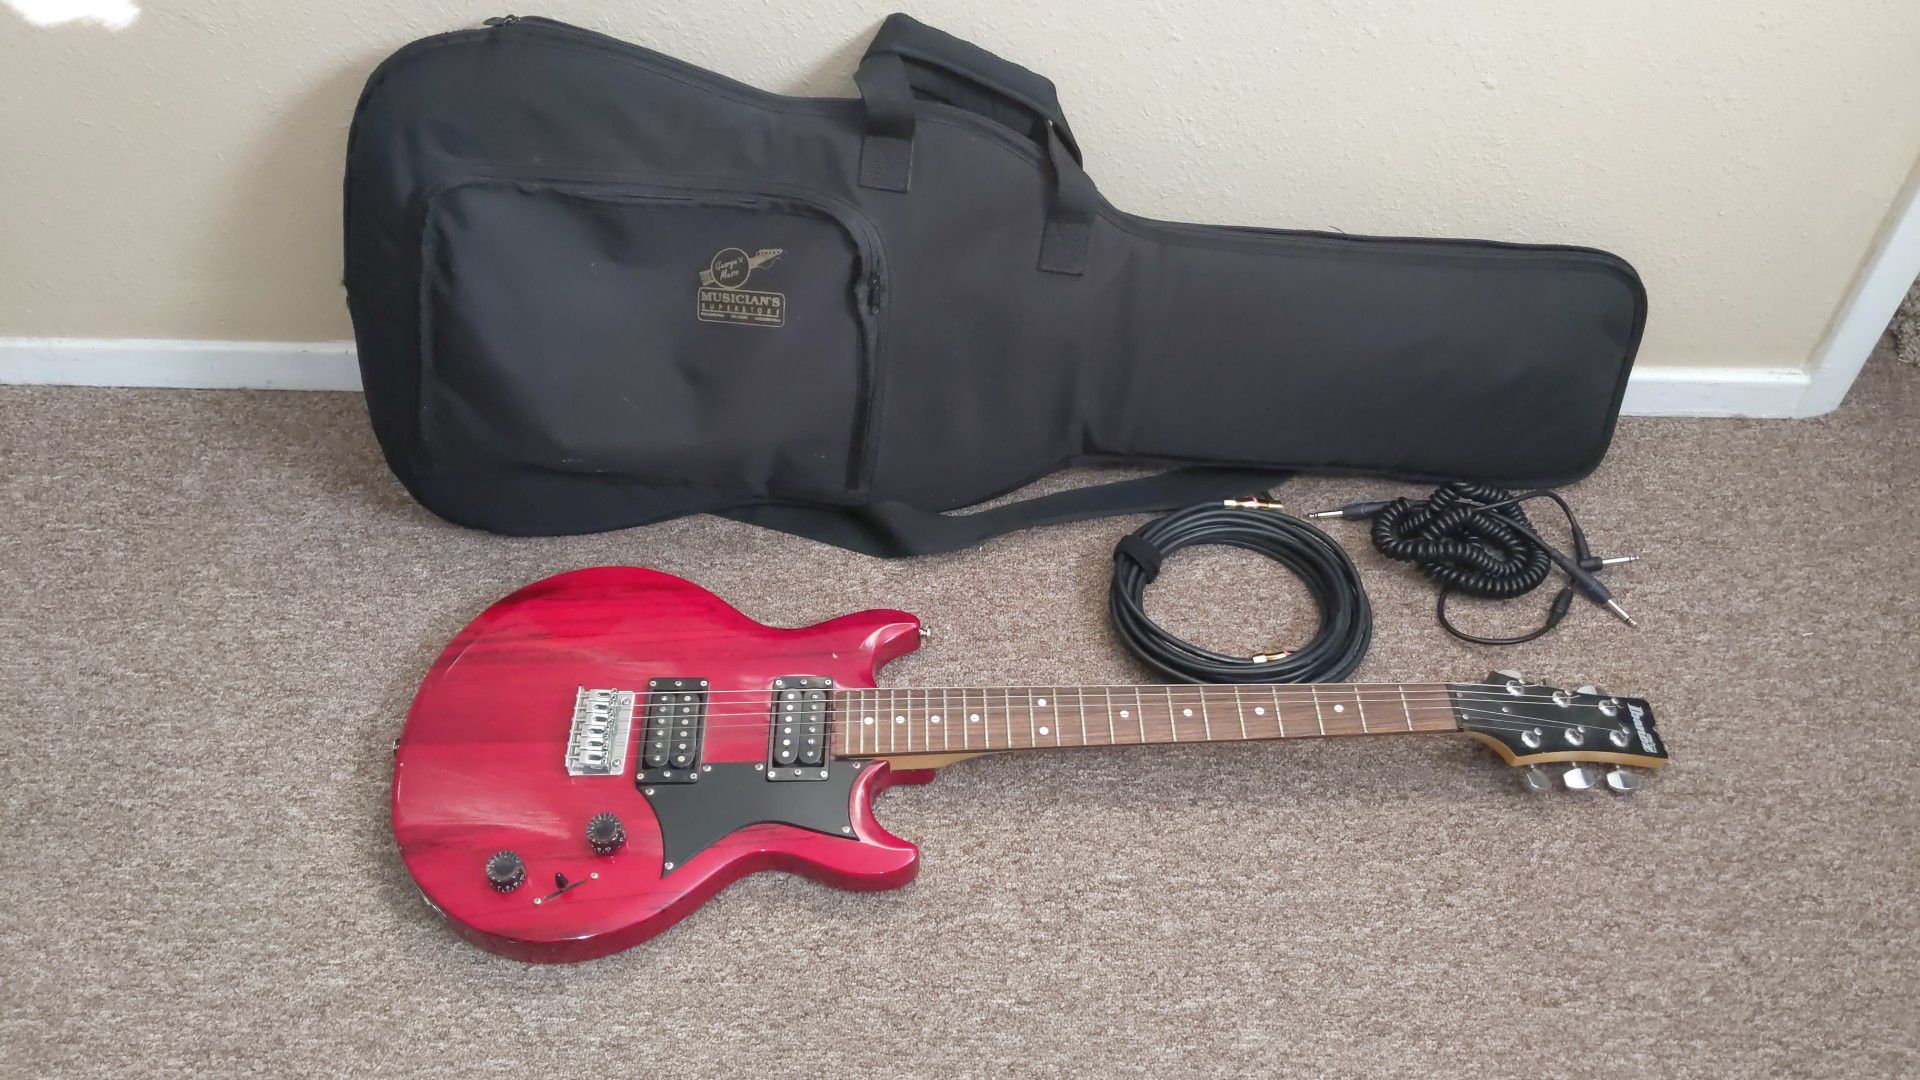 Ibanez electric guitar with padded gig bag and extras